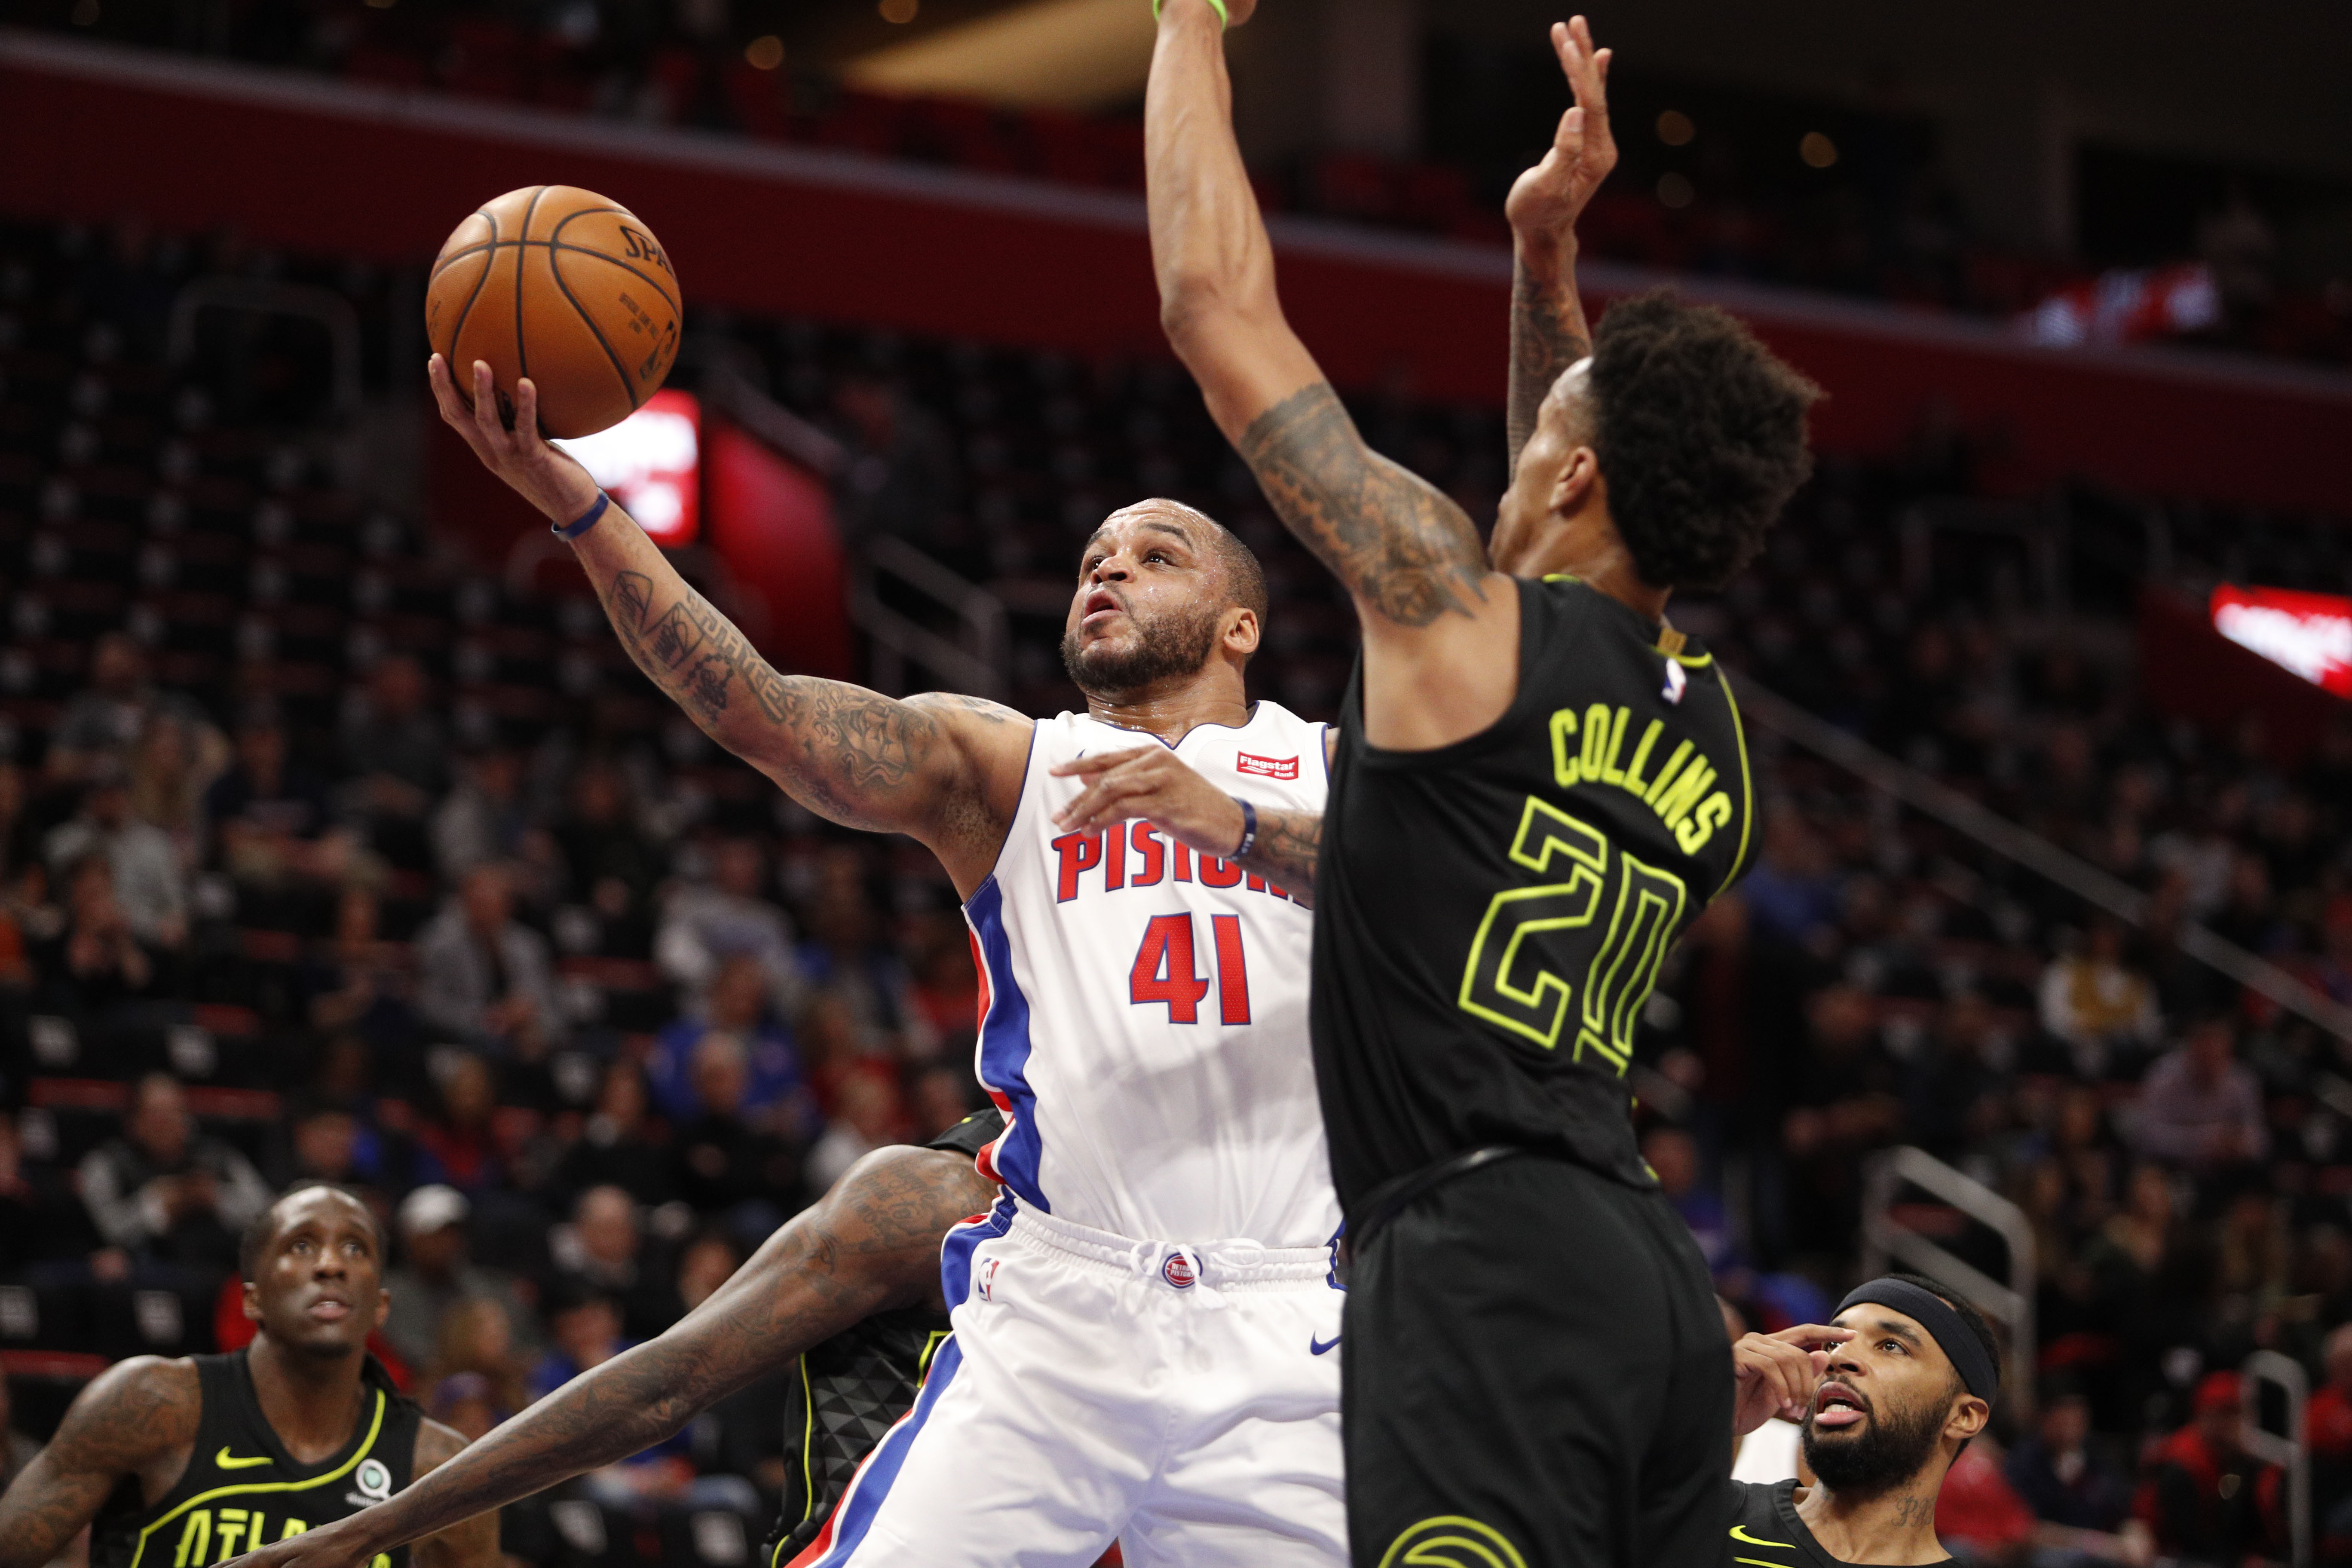 Jameer Nelson in action for the Pistons